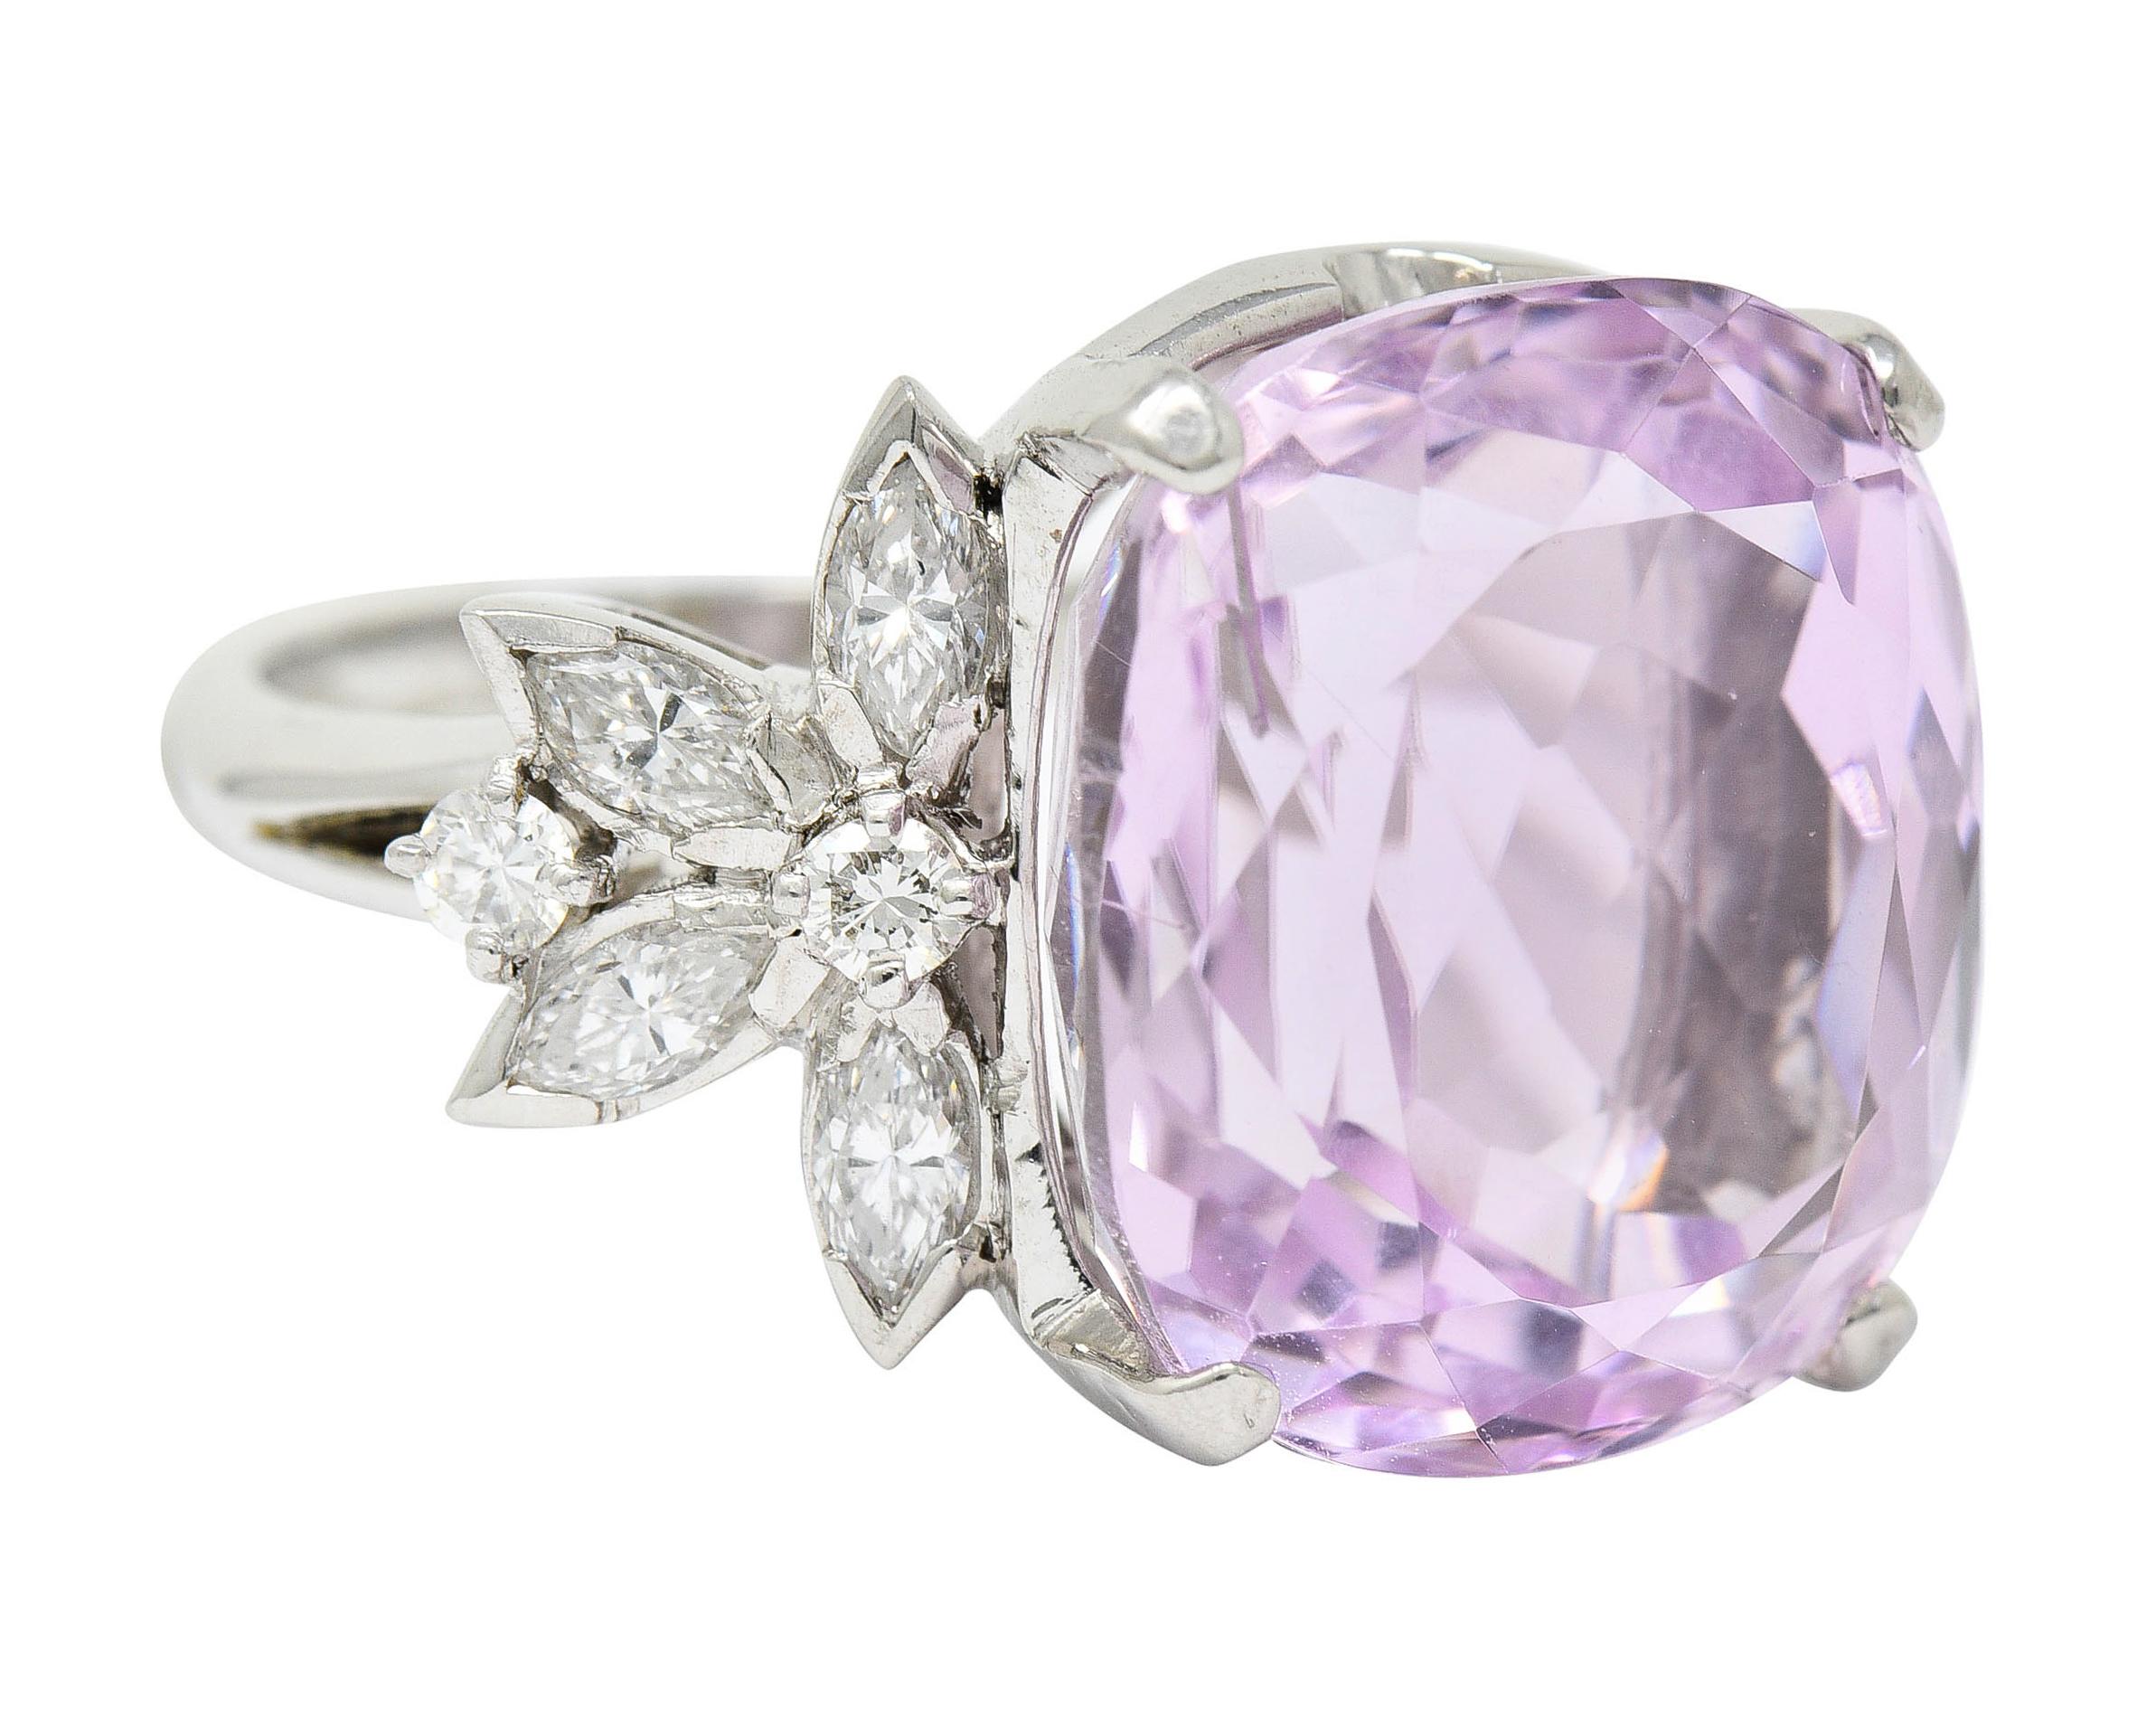 Centering a basket set mixed cushion cut kunzite measuring approximately 16.5 x 15.0 mm

Transparent with stunning medium light lavender pink color

Flanked by stylized floral shoulders comprised of marquise and round brilliant cut